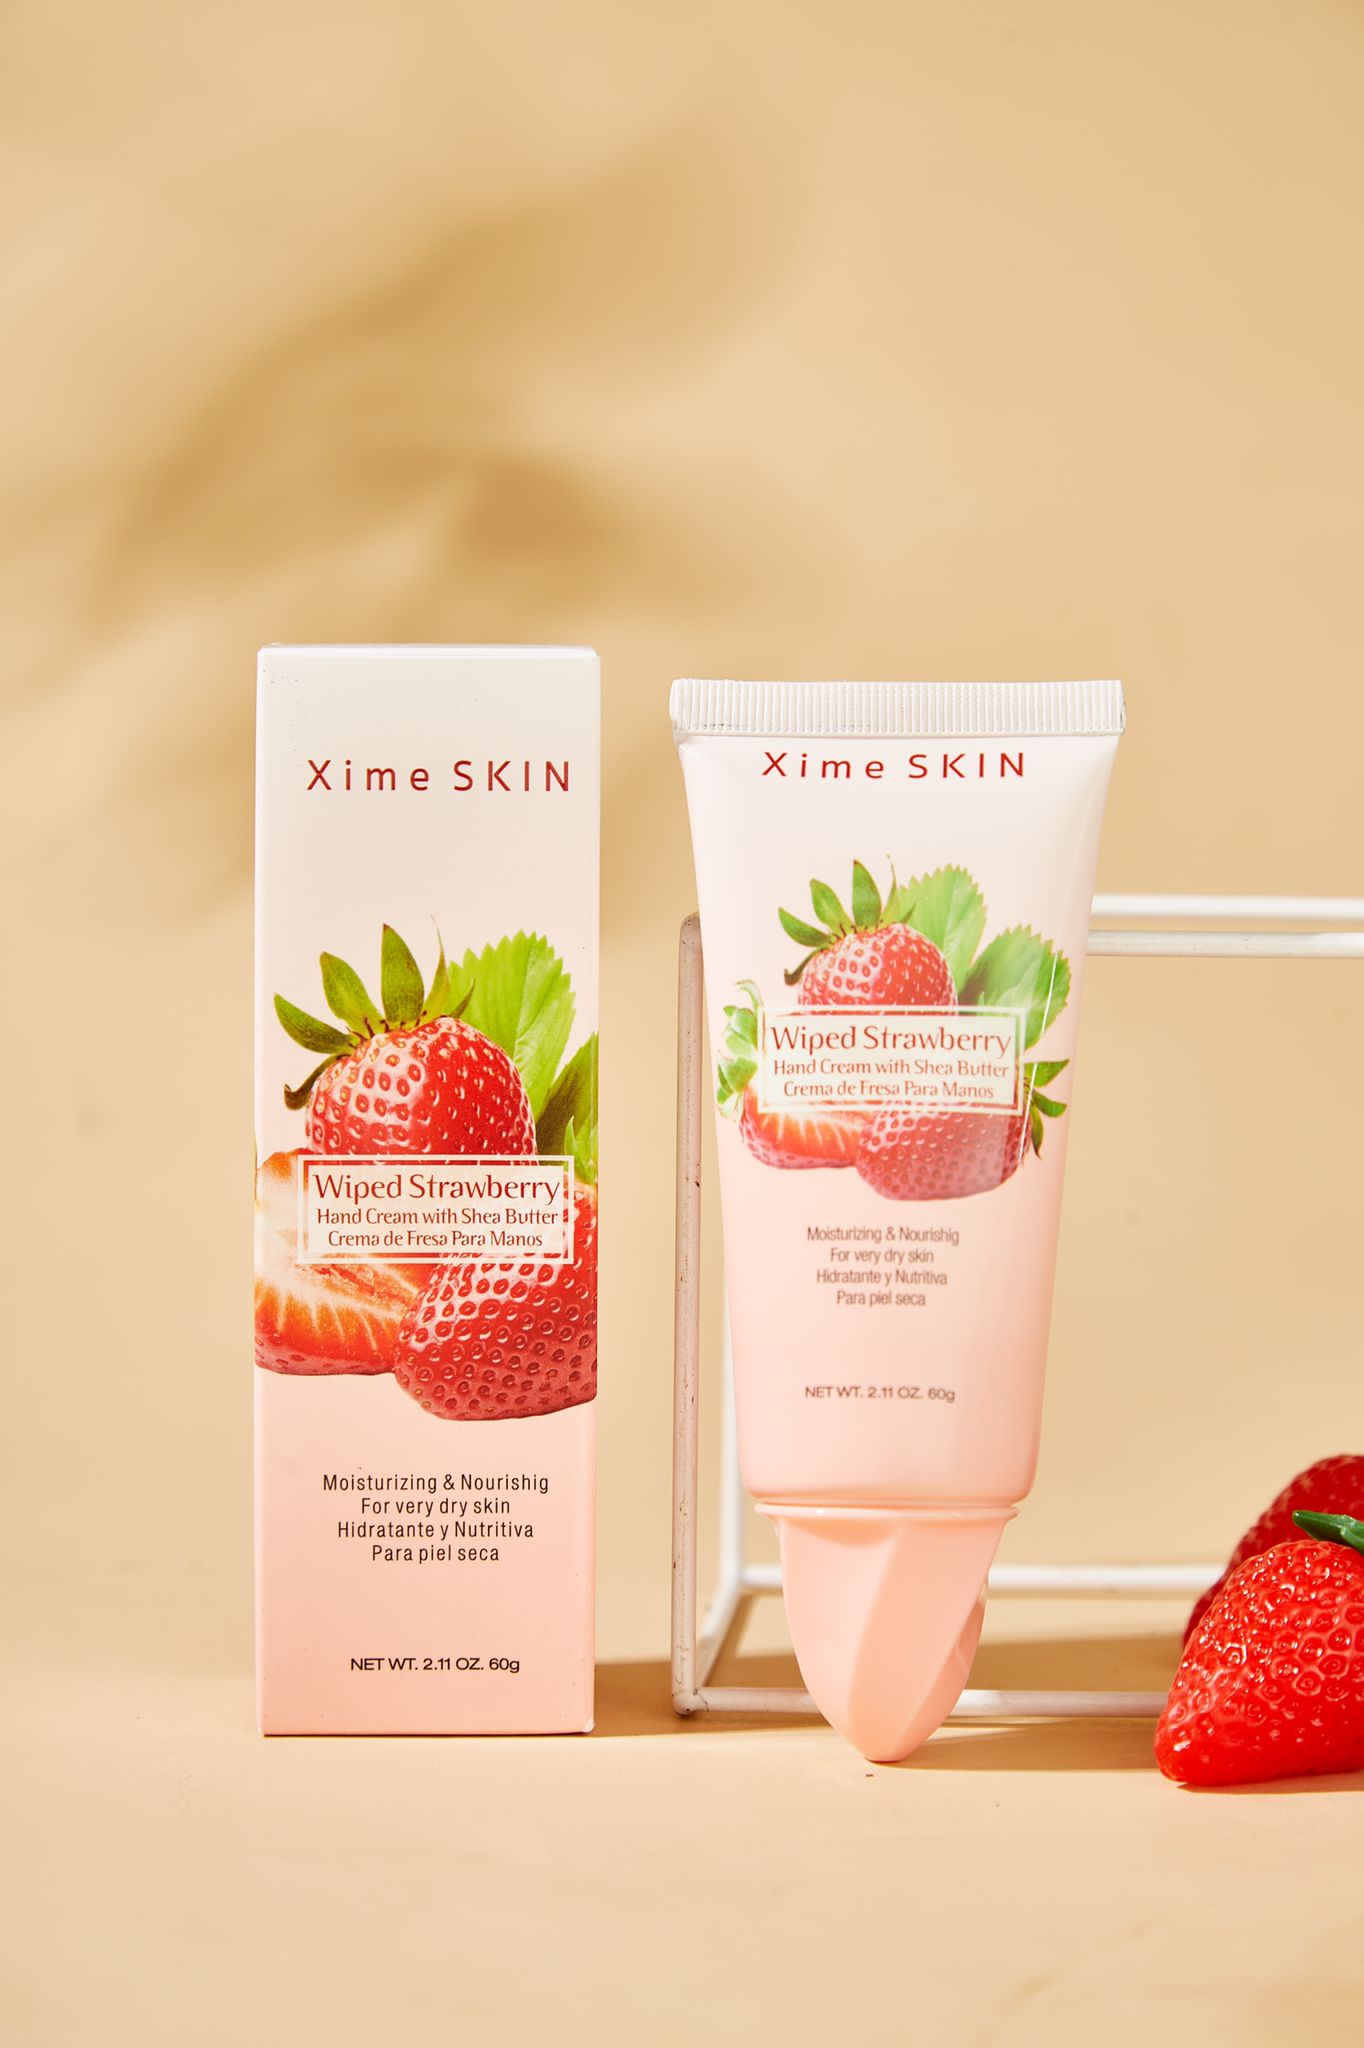 XIME SKIN - WIPED STRAWBERRY HAND CREAM WITH SHEA BUTTER